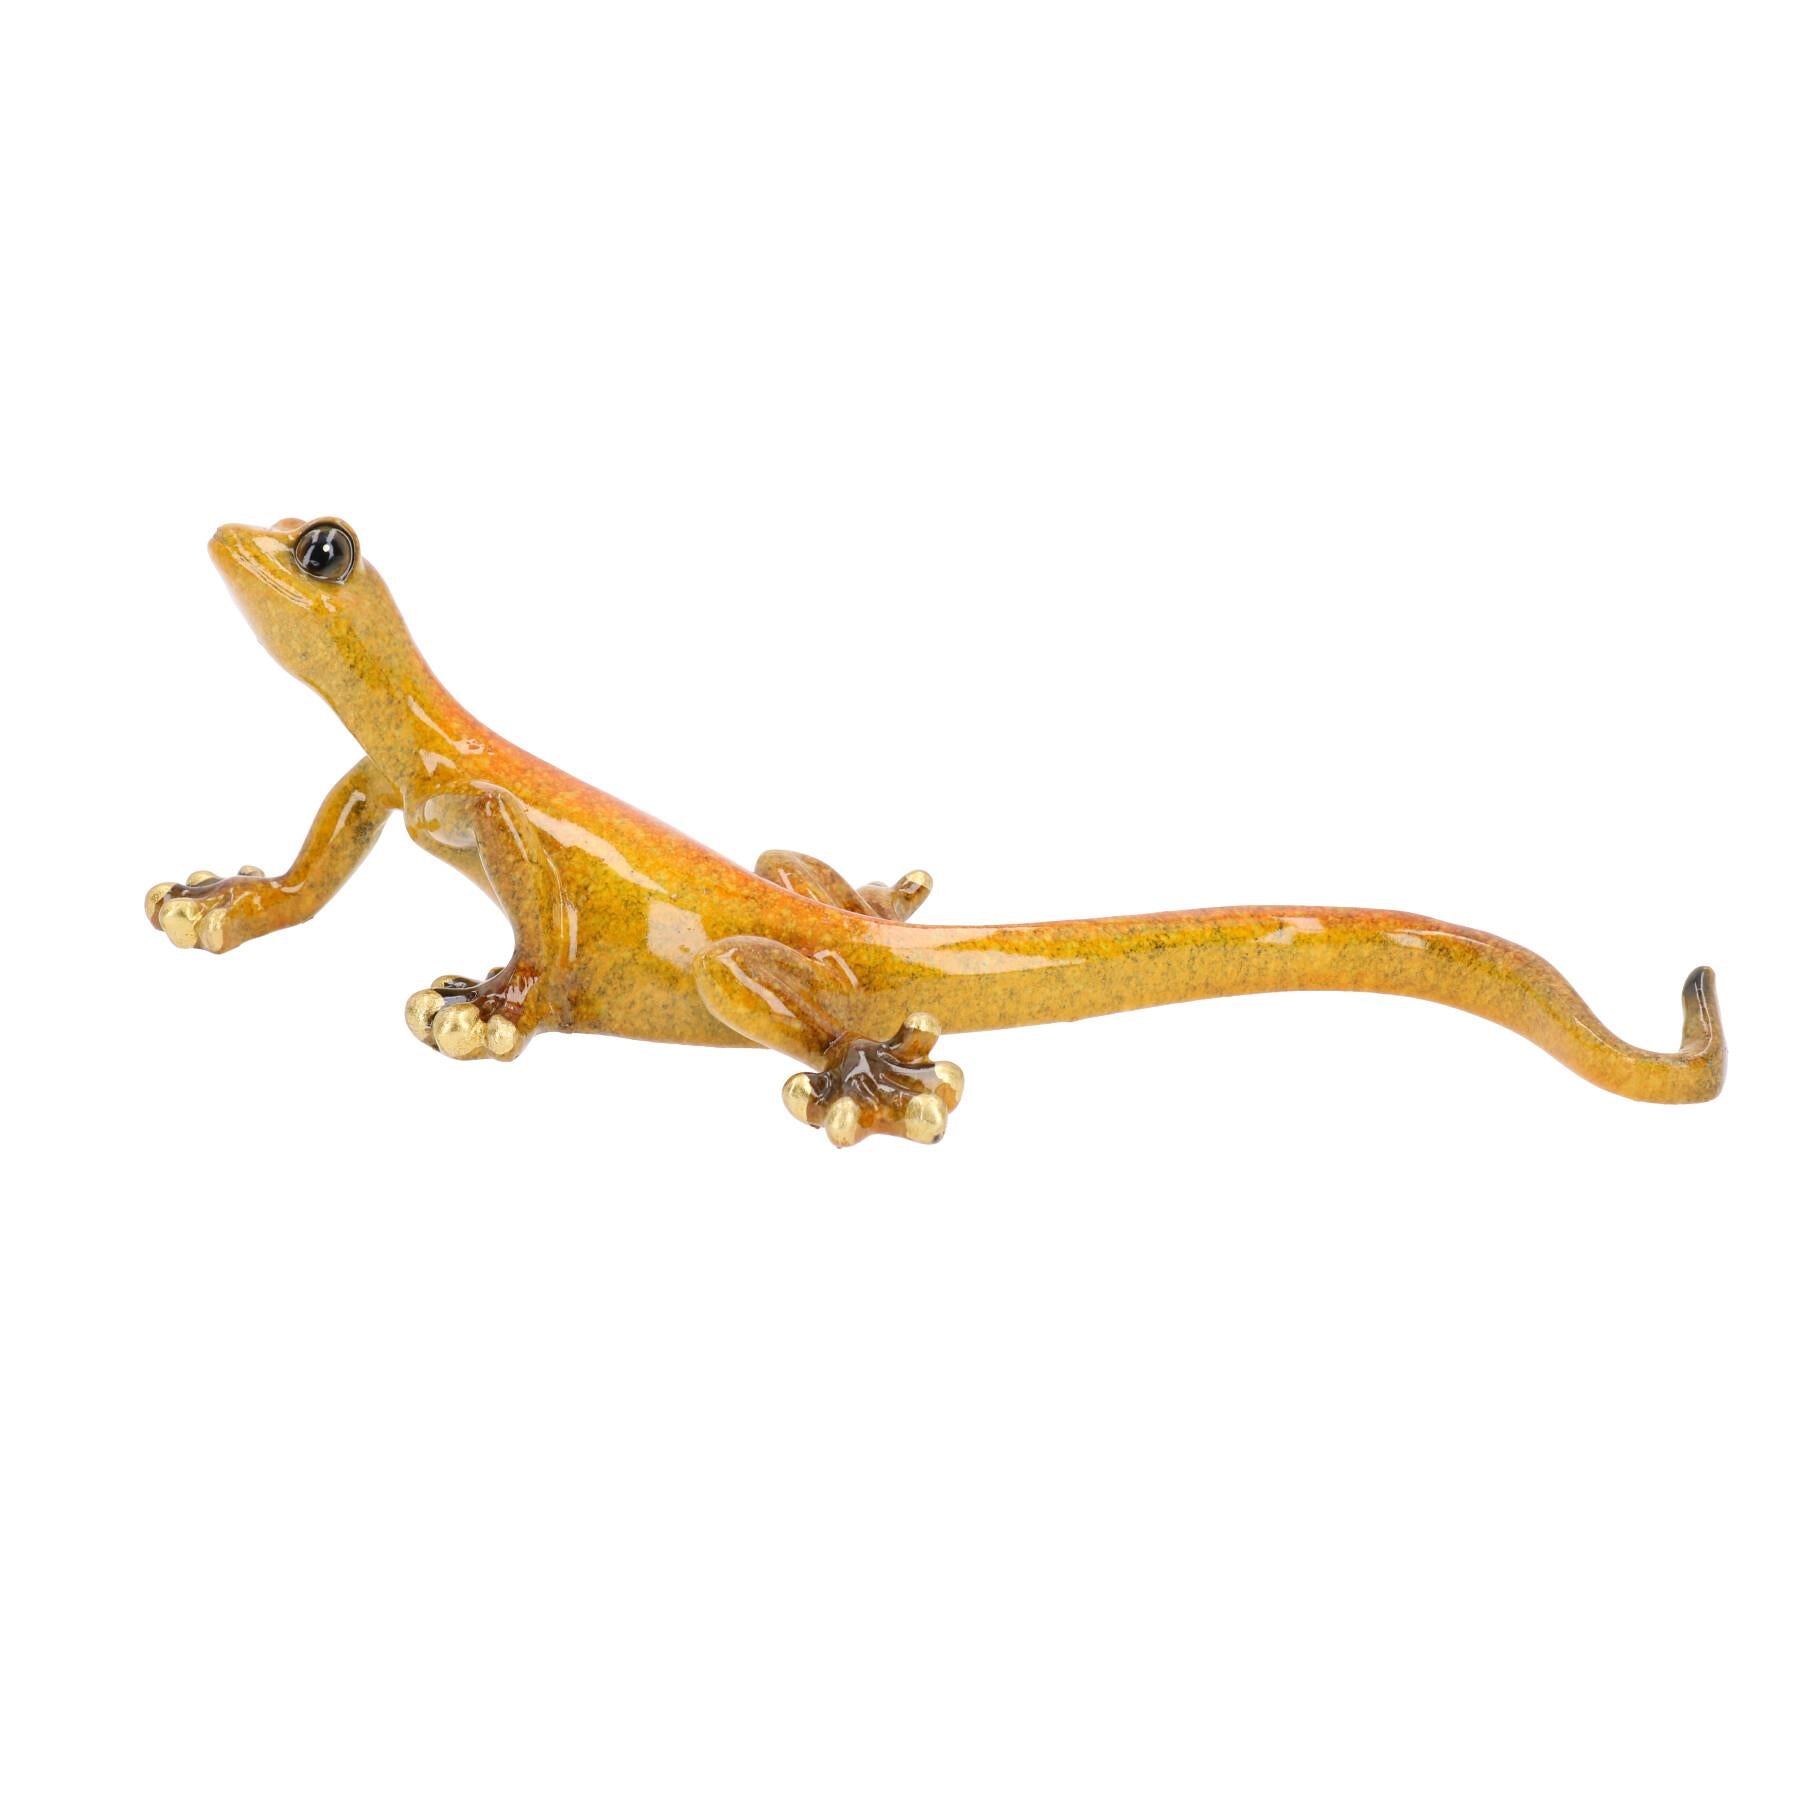 Yellow Speckled Gecko Lizard Resin Wall Shed Sculpture Statue House Small